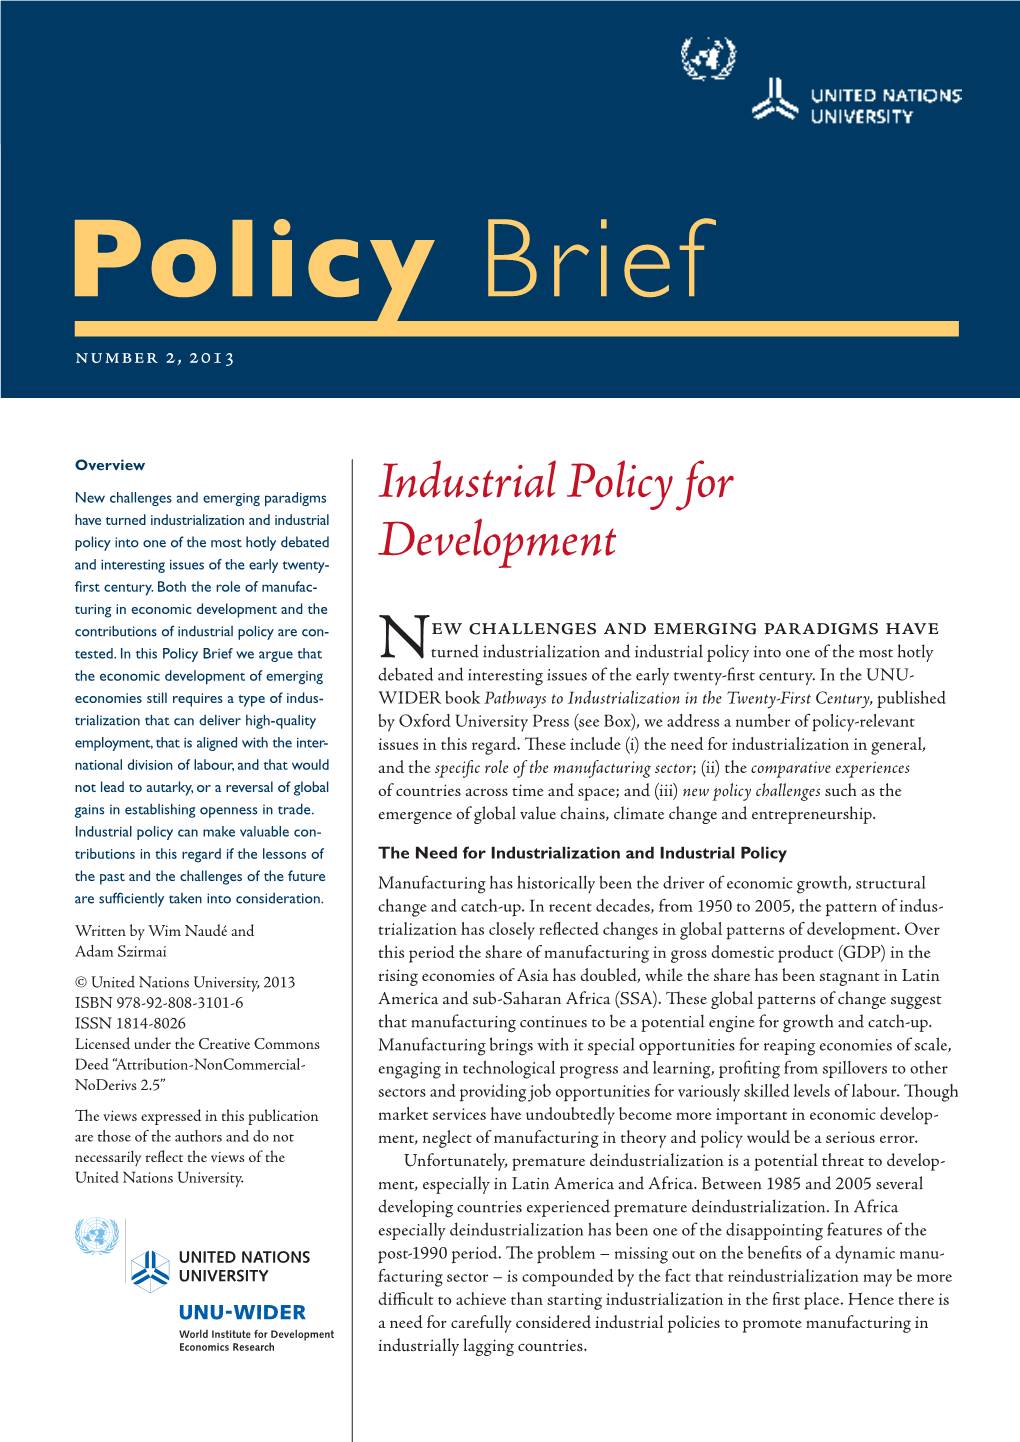 Industrial Policy for Development 3